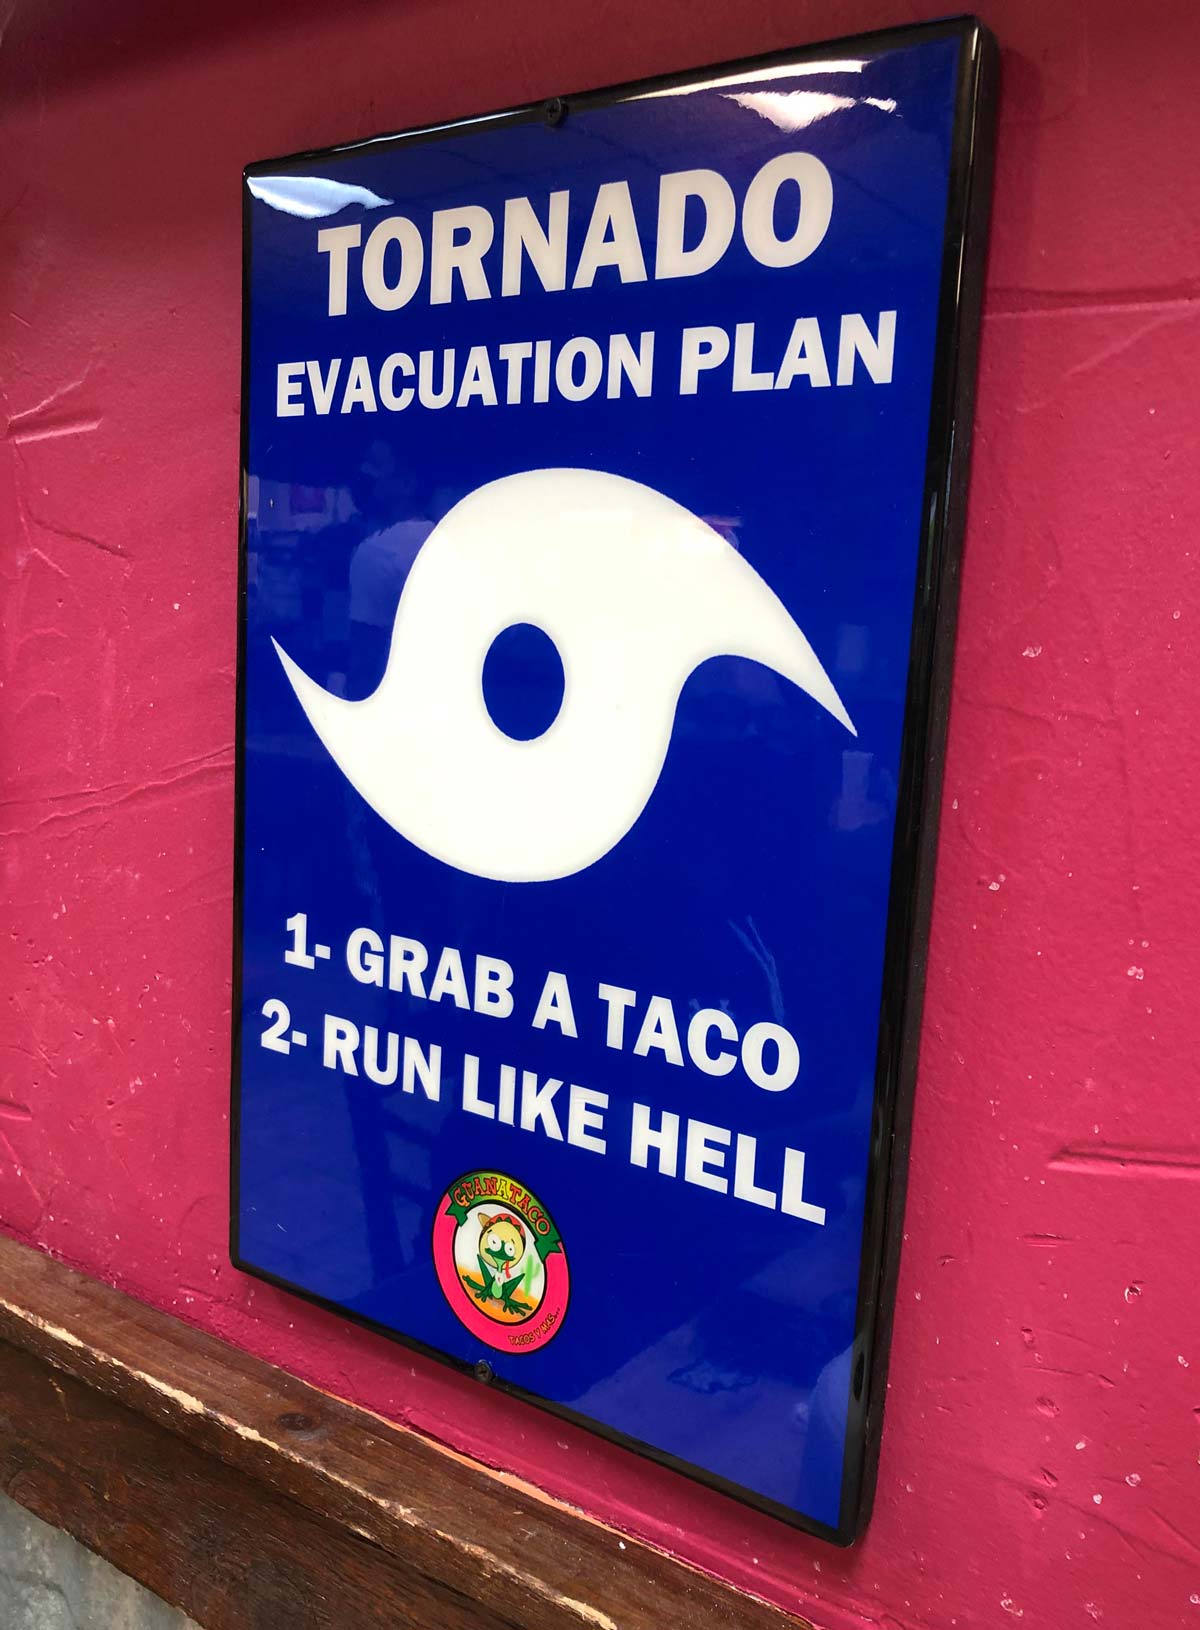 A sign at a local hole in the wall taco place